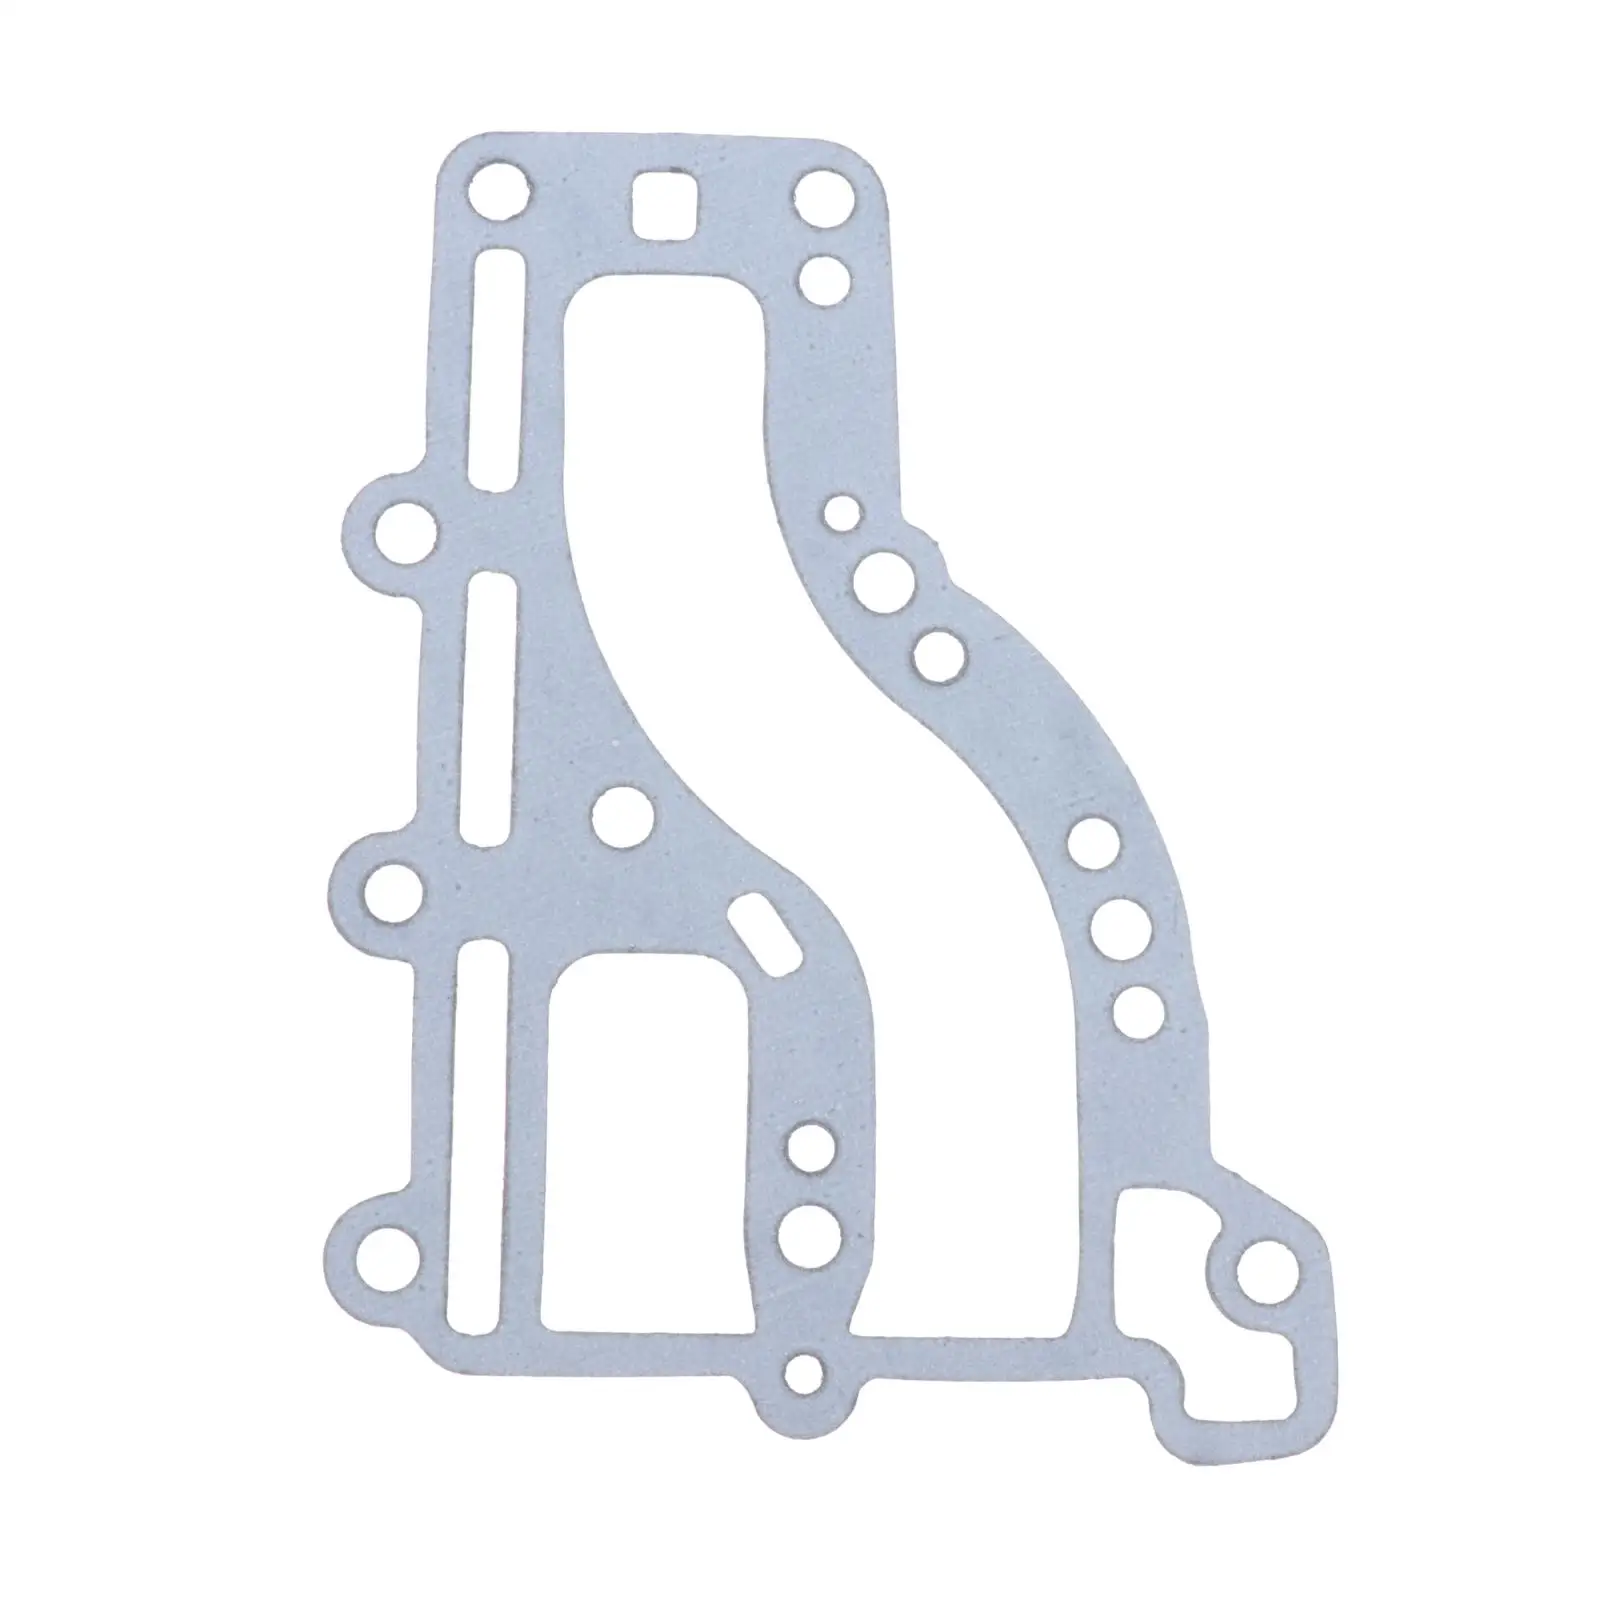 New Cylinder Inner Gasket Spare Parts Fits for Yamaha Outboard fuera de borda 2T 9.9 15 HP 2 Stroke 682 6E7 series 682-41112-A0